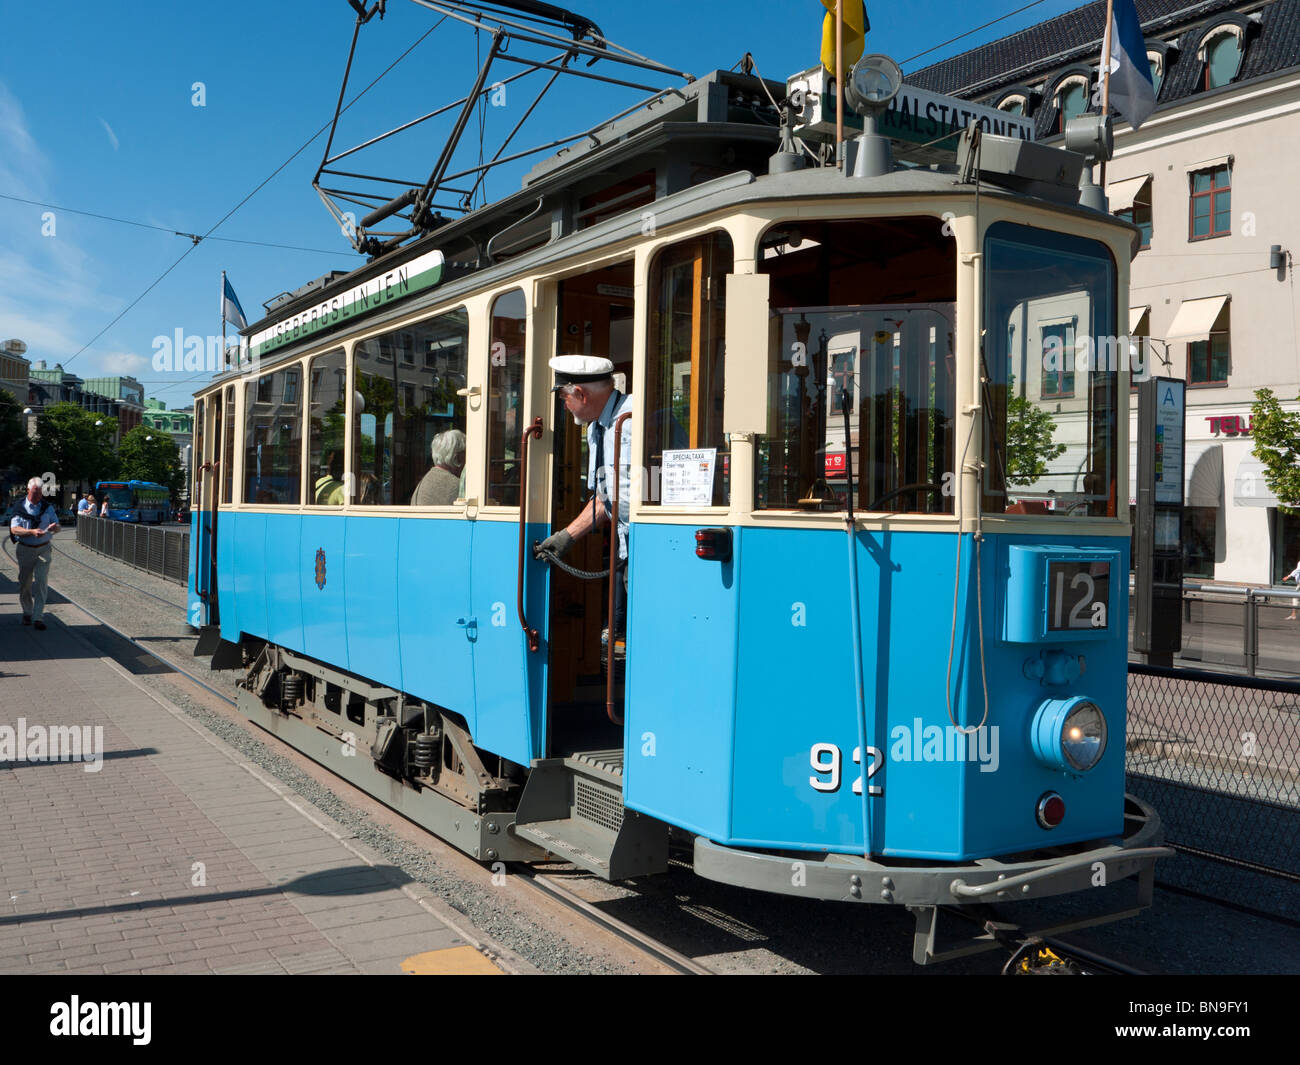 View of vintage tram carrying tourists to Liseberg amusement park in Gothenburg in Sweden Scandinavia Stock Photo